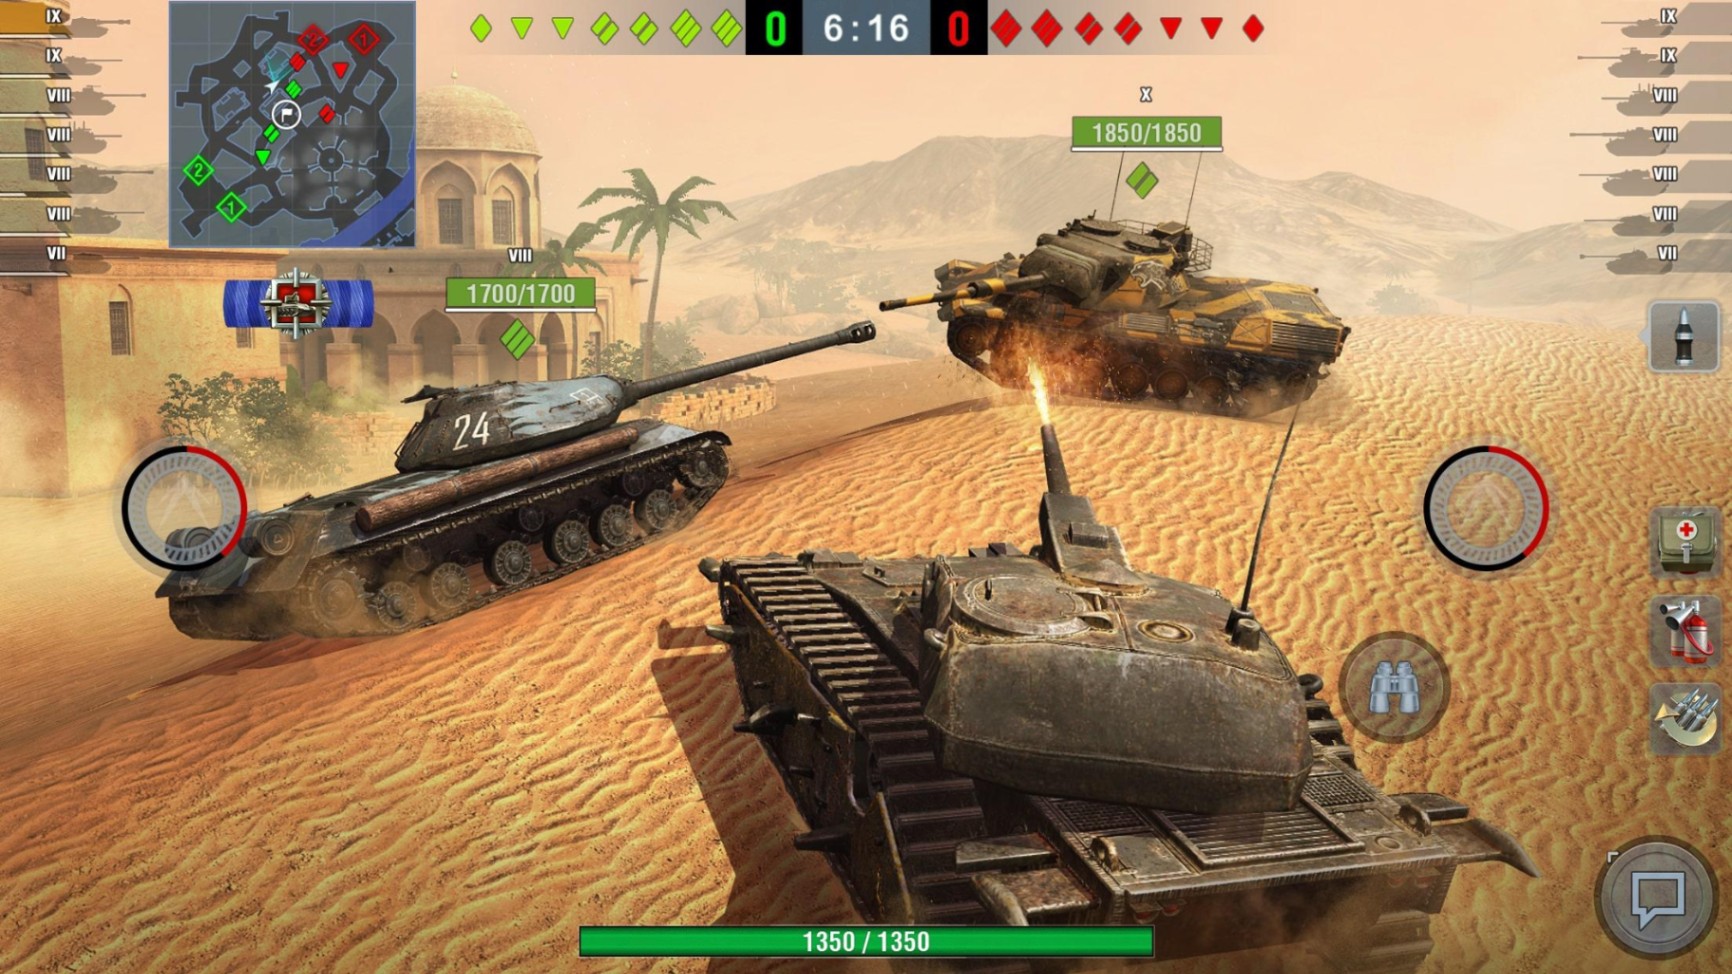 How To Get Money In World Of Tanks Blitz